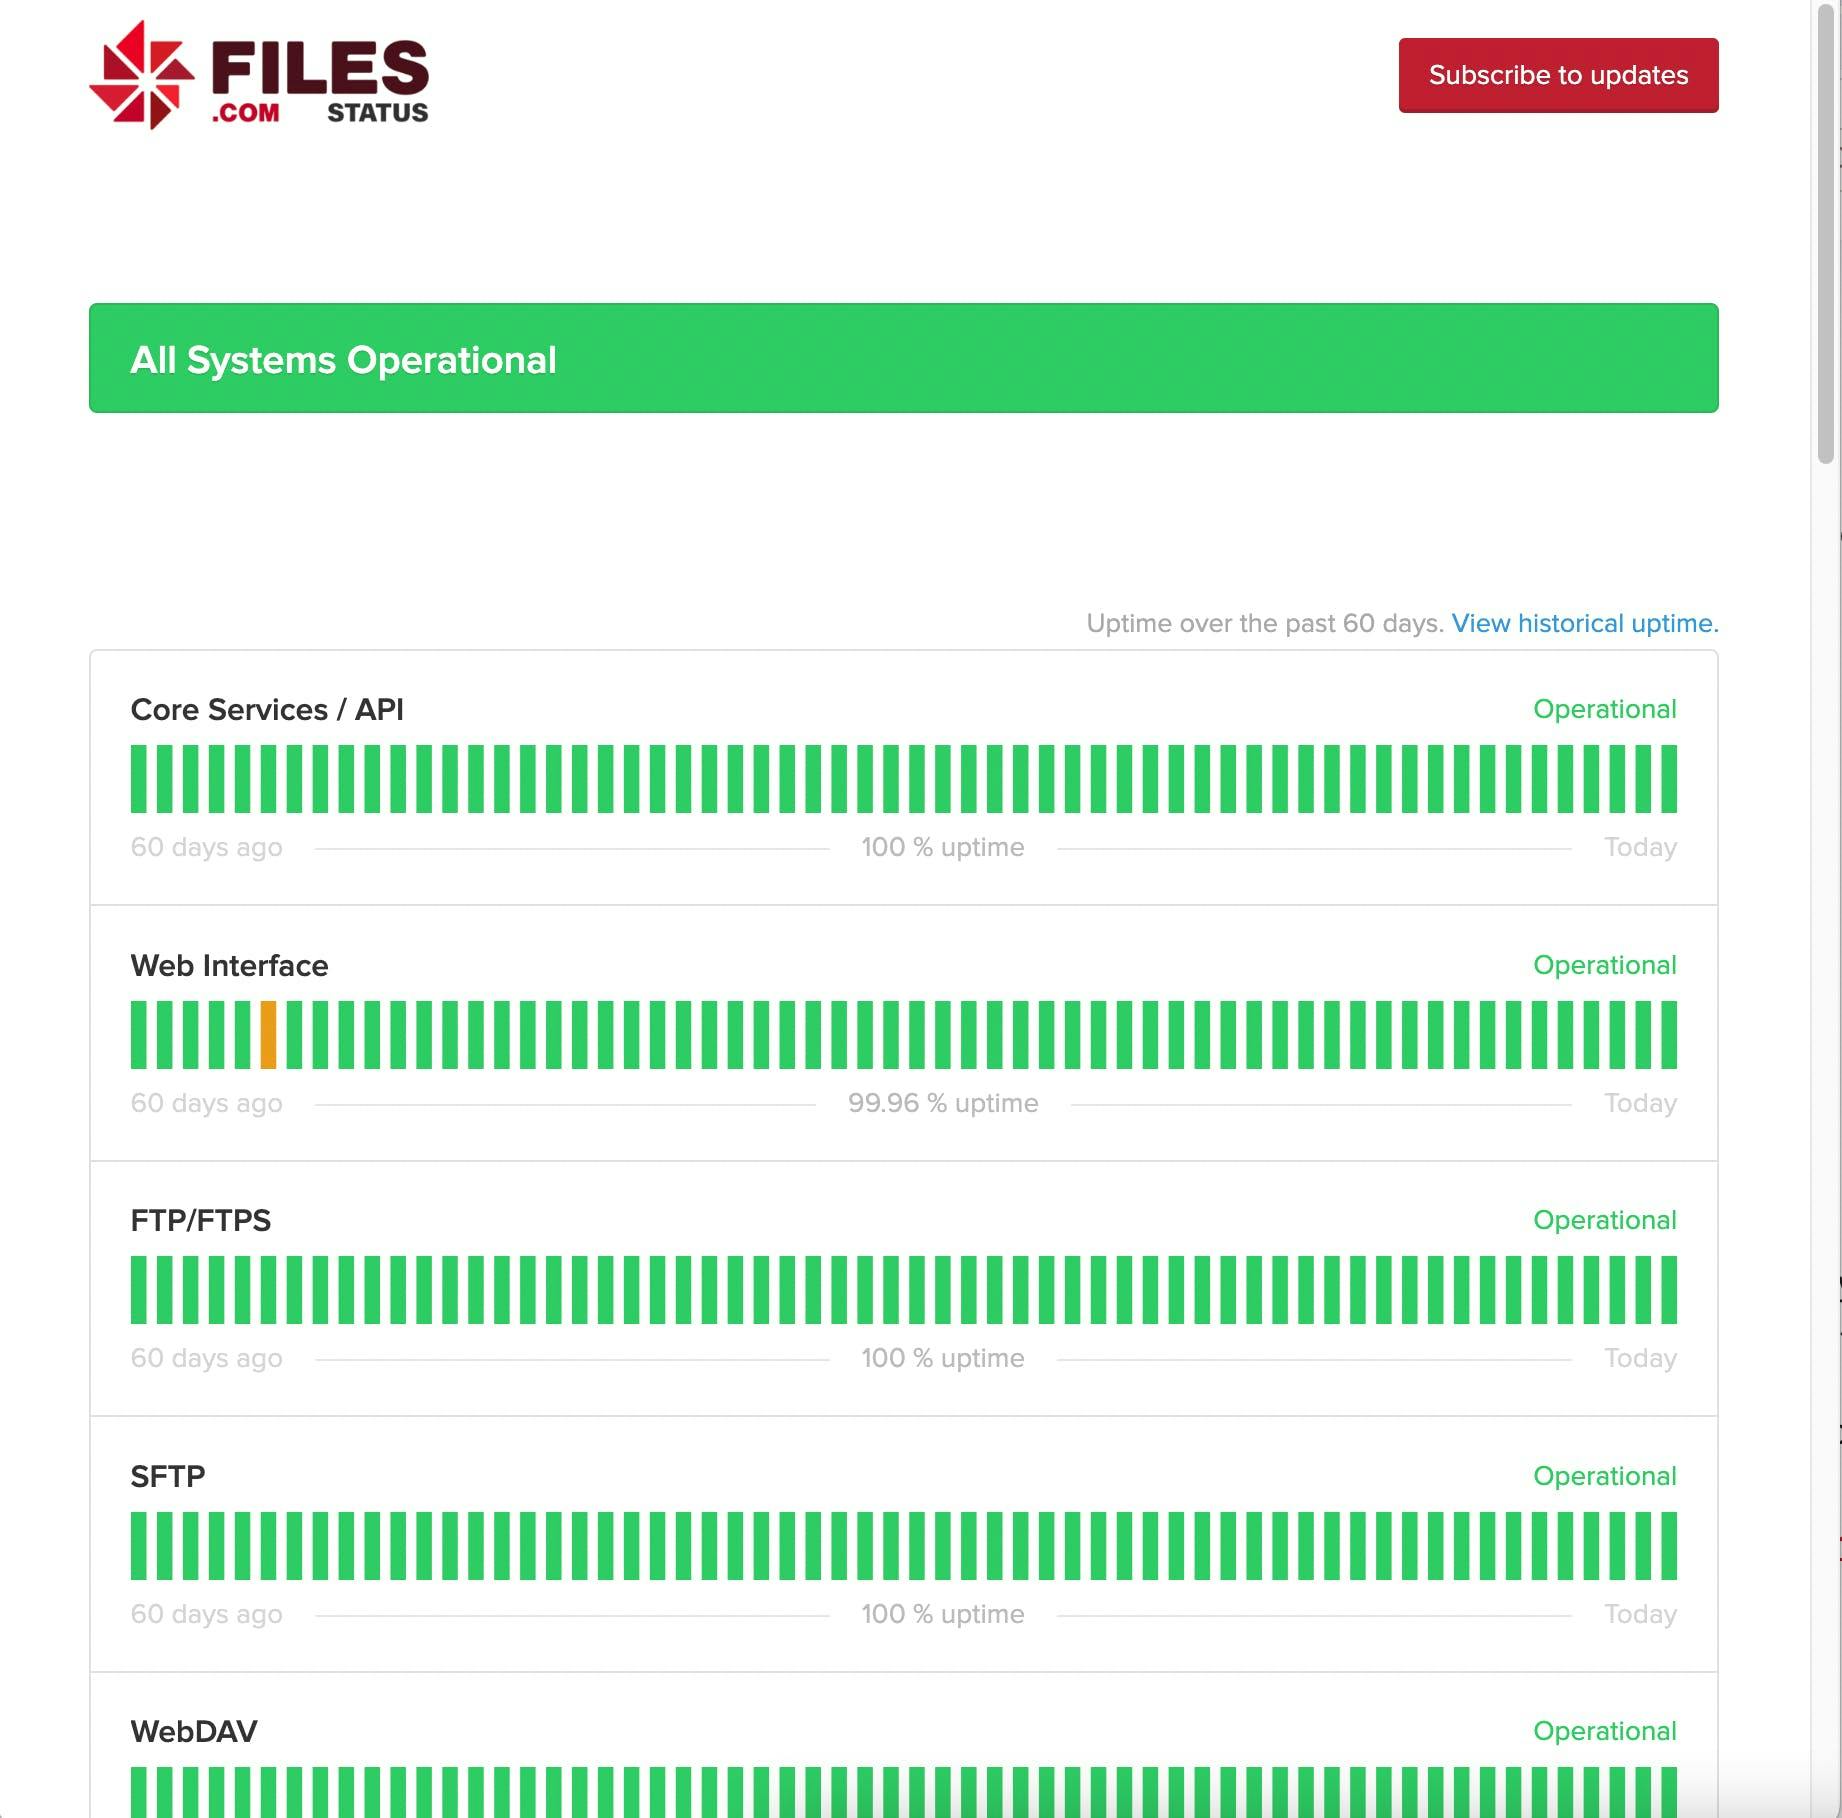 Files.com status page showing operational statuses of available protocols and interfaces.